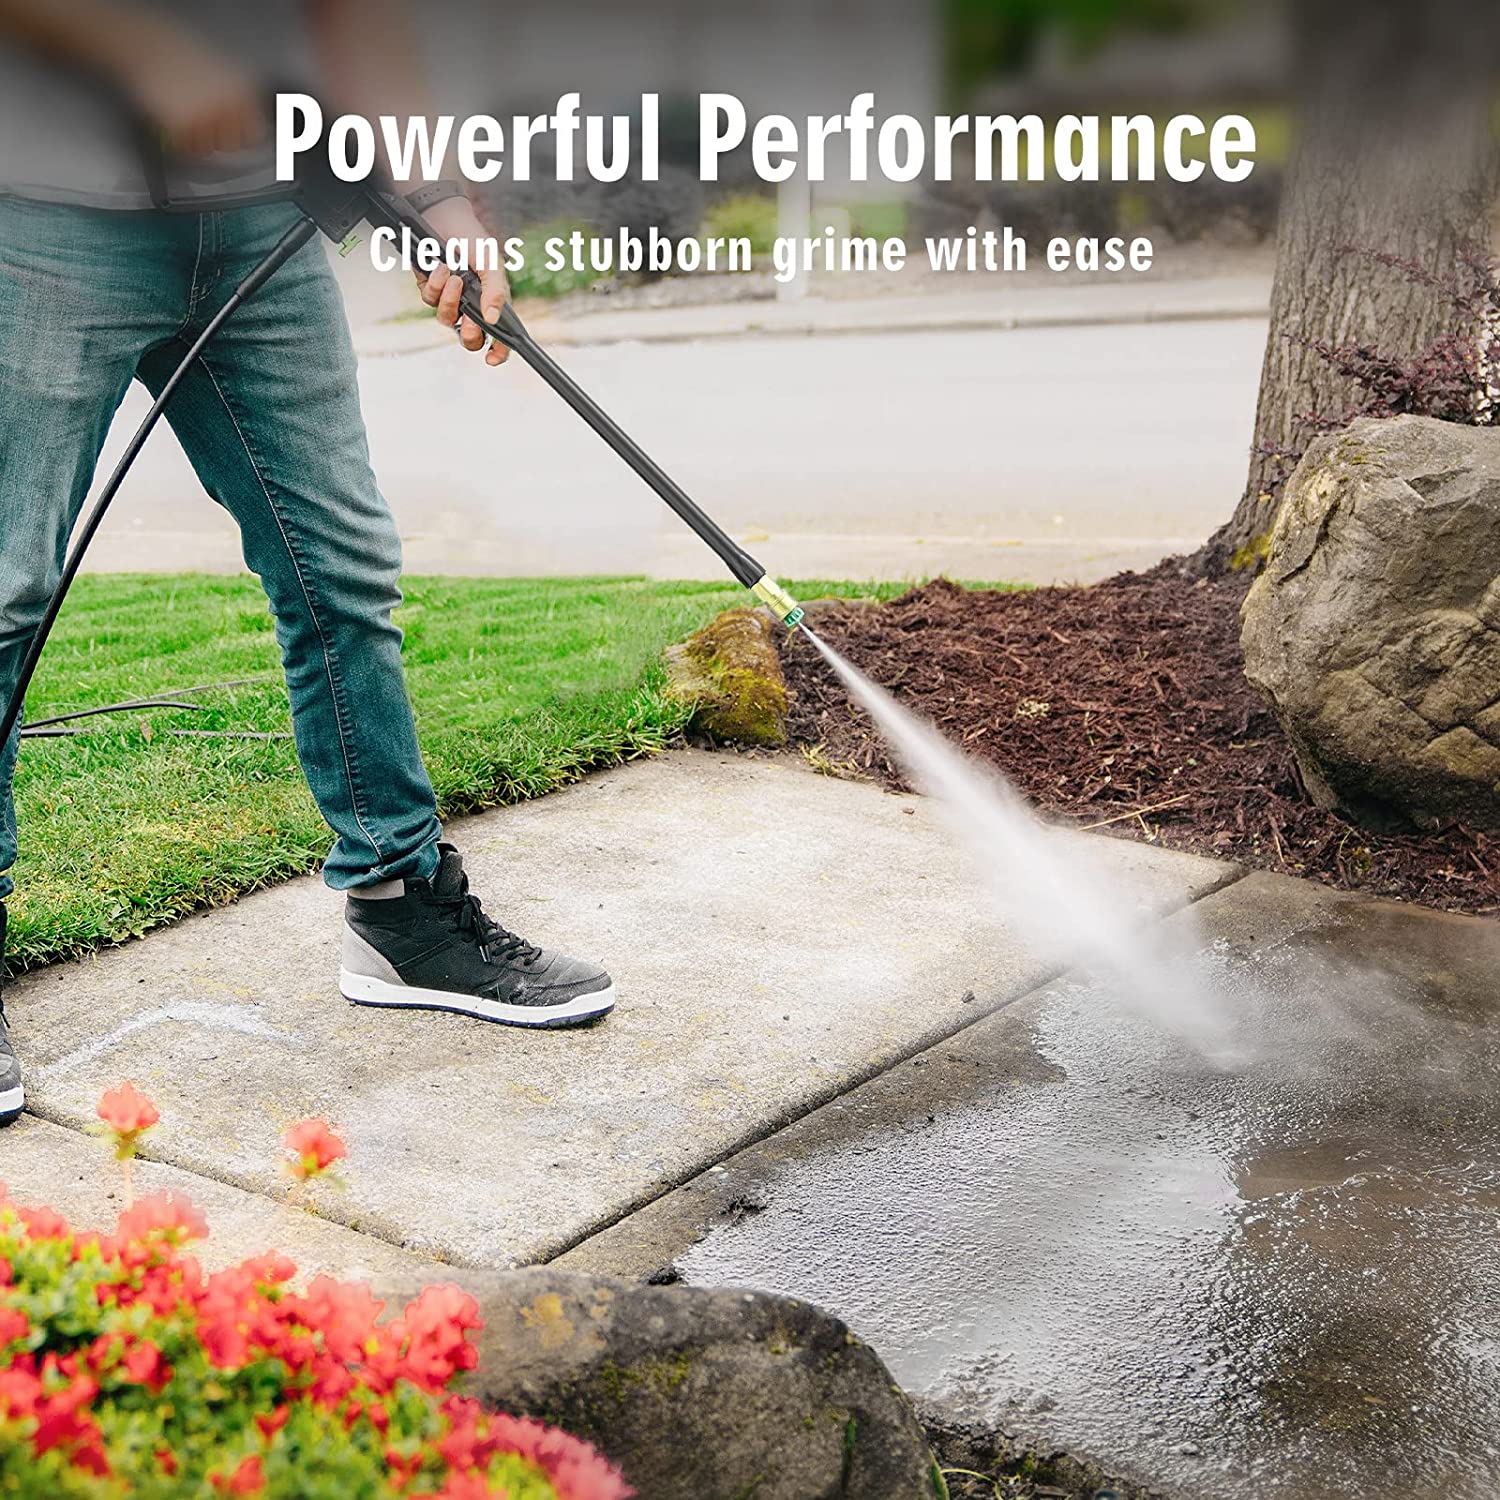 SWIPESMITH Electric Pressure Washer, 2500 Max PSI 2.4 GPM Power Washer with Telescopic Handle